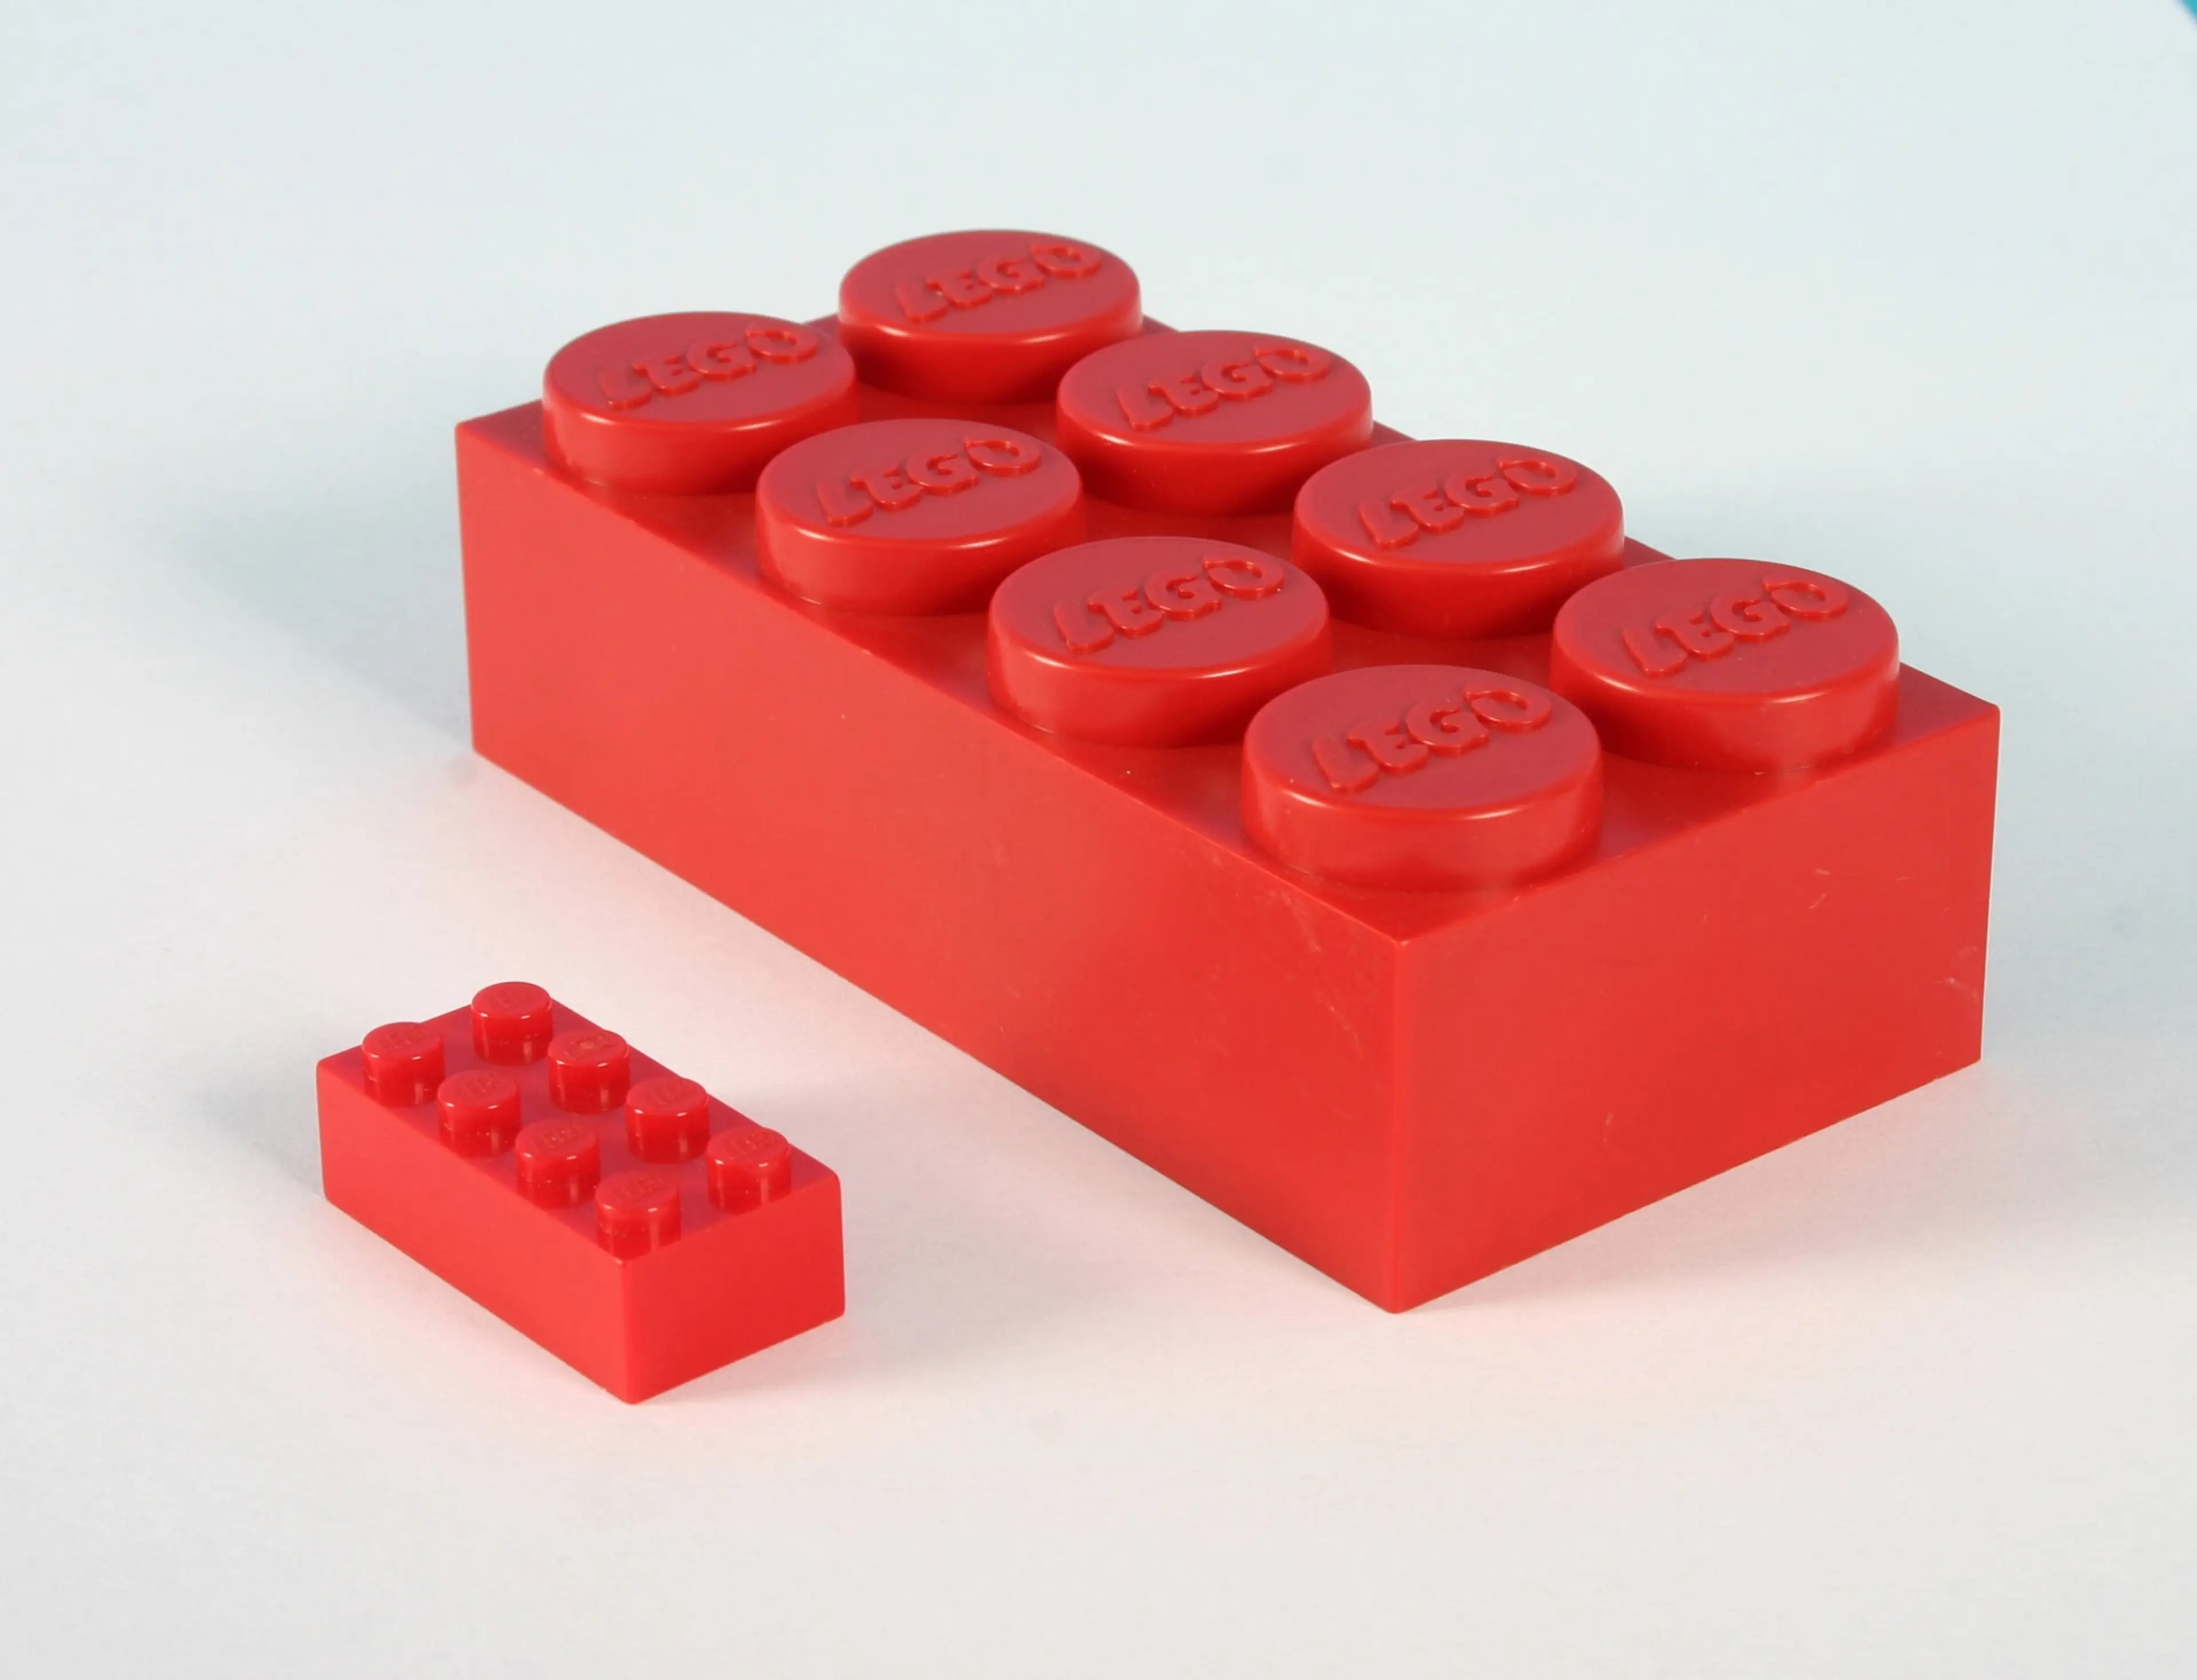 a red LEGO brick next to a red JUMBO brick